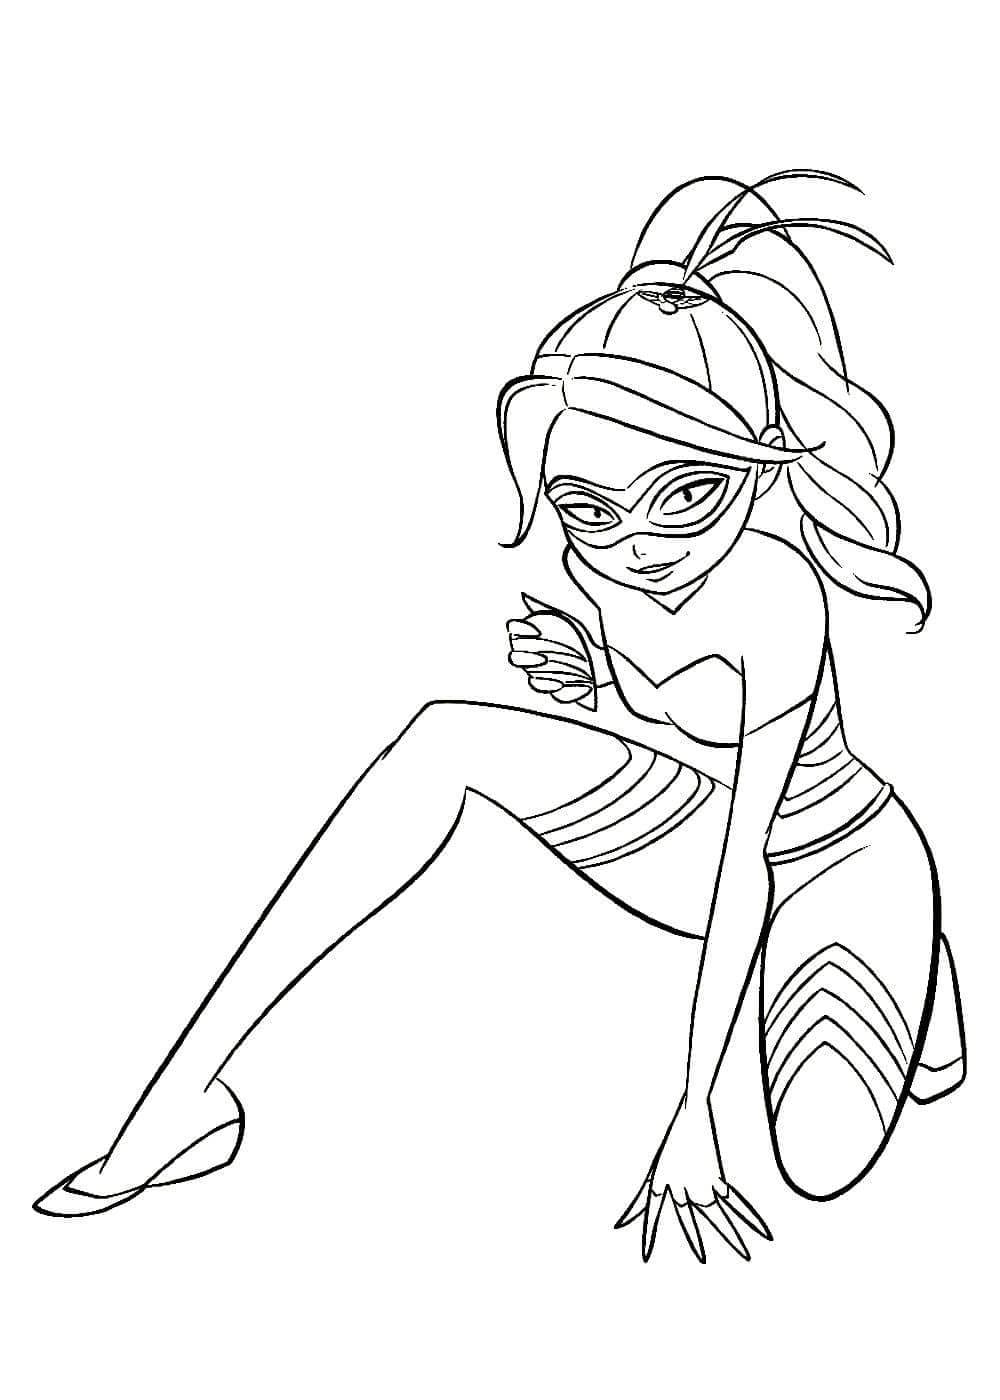 Ladybug And Cat Noir Kwami Coloring Pages Free Printable Miraculous Ladybug Coloring Pages Kwami Dotsonmemphis